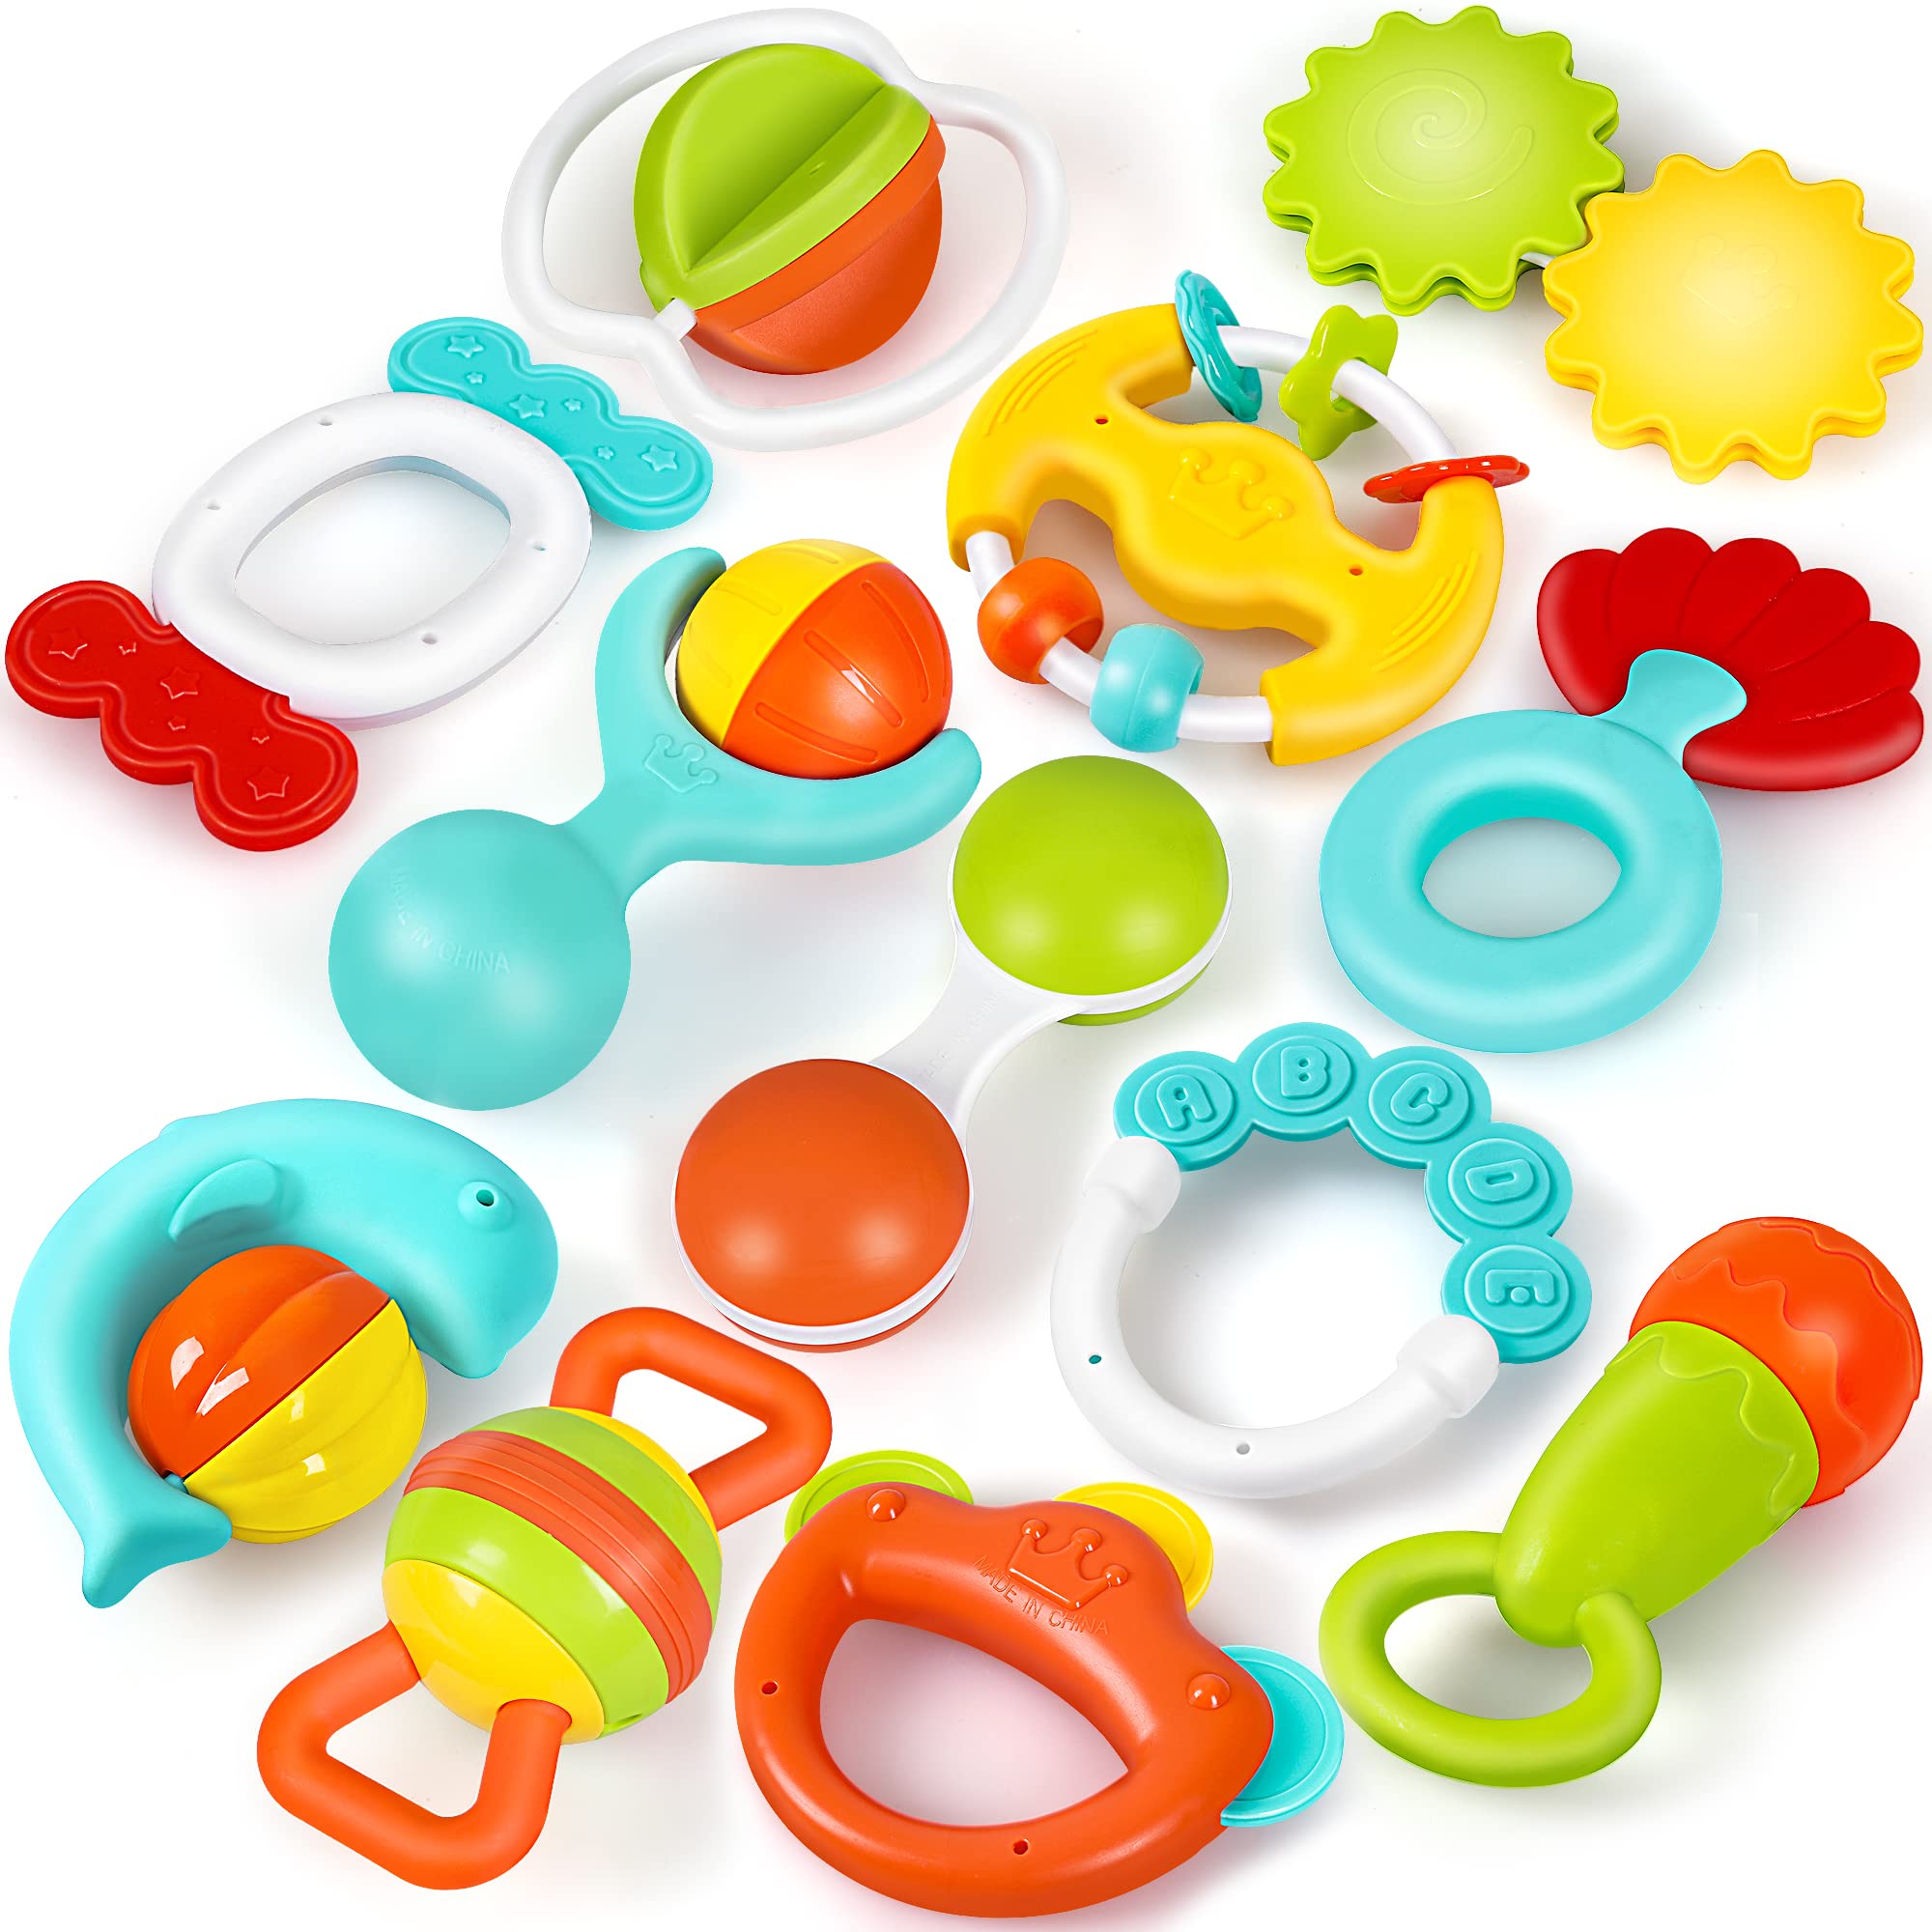 JEMSHE Baby Toys for 0-3-6-8-12 Months Infant Rattles Teething Set-12pcs colorful Newborn Early Educational Sensory Toys-Enlight